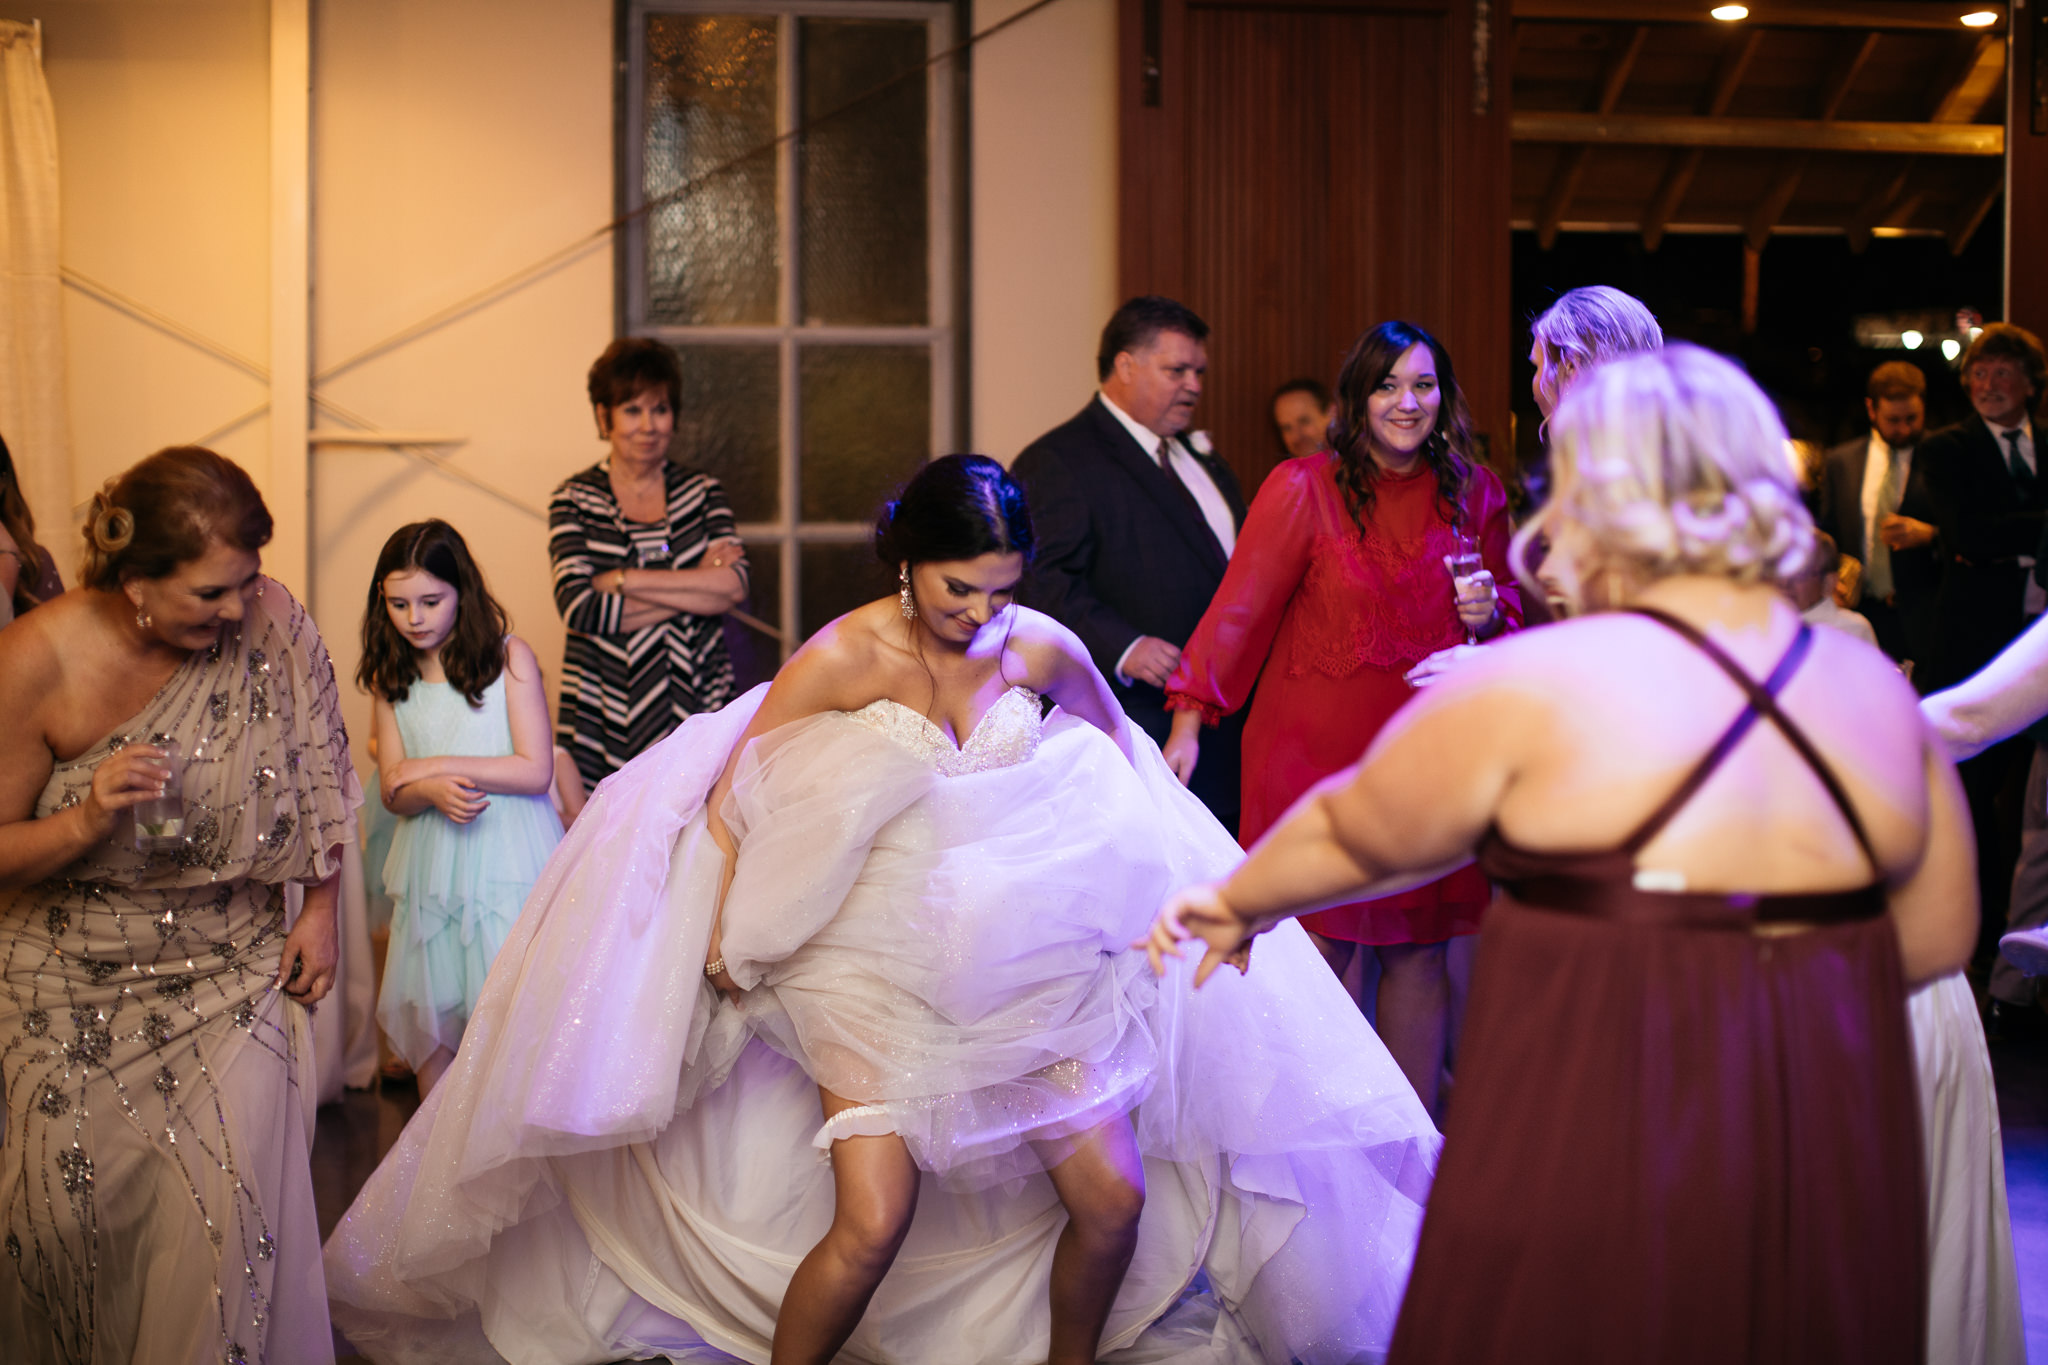 memphis-wedding-photographer-the-warmth-around-you-best-dance-moves-5.jpg